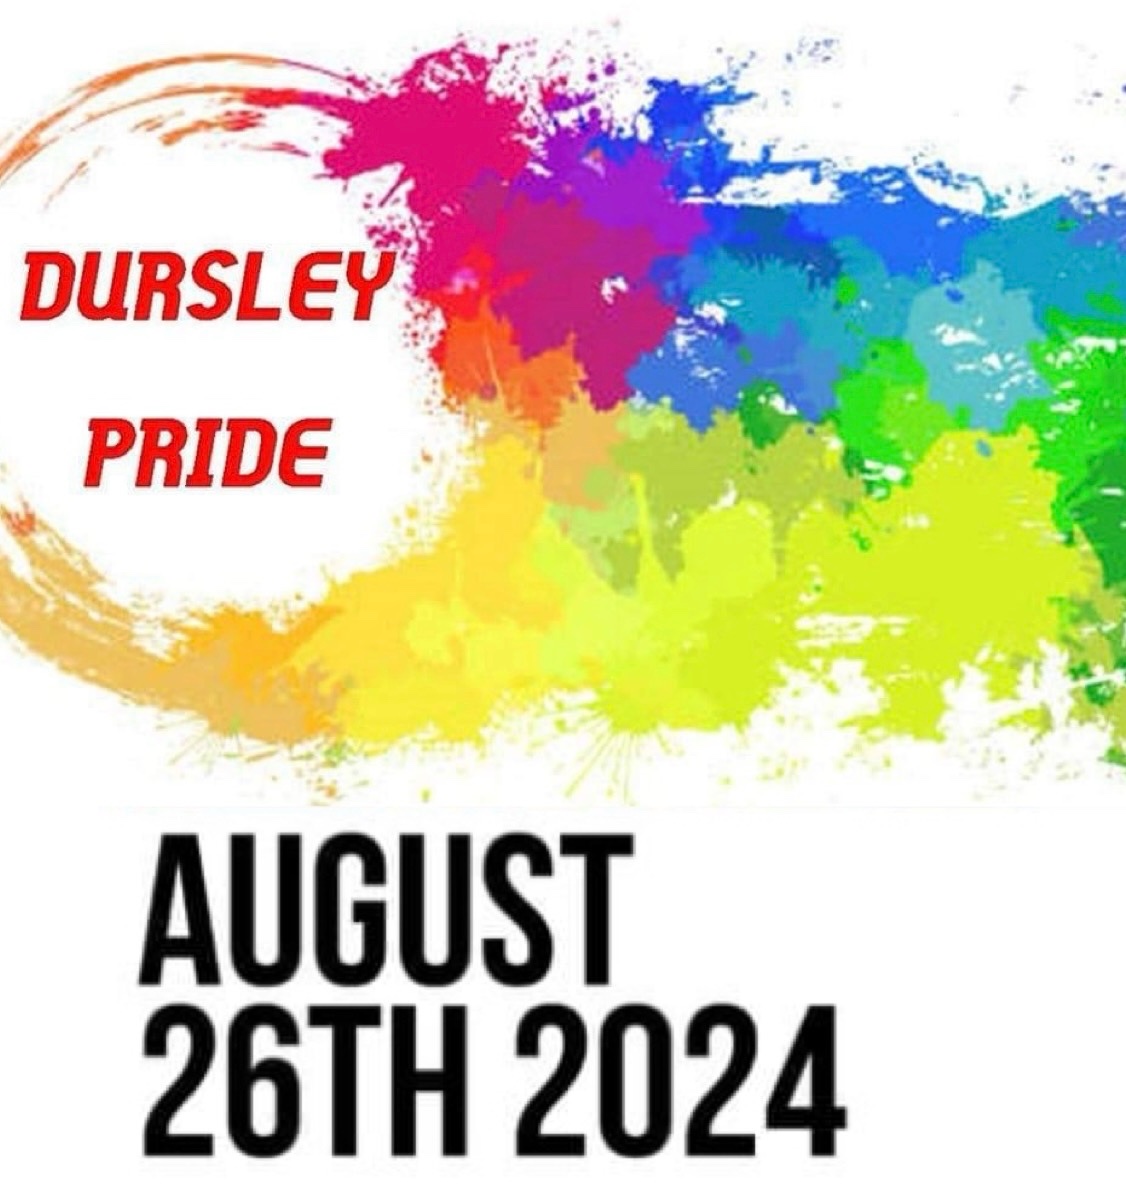 #Gloucestershire get your diary. #DursleyPride - a chance to be proper out out on Bank Holiday Monday August 26th 🌈 Weather forecast: rainbows, glitter, joy.